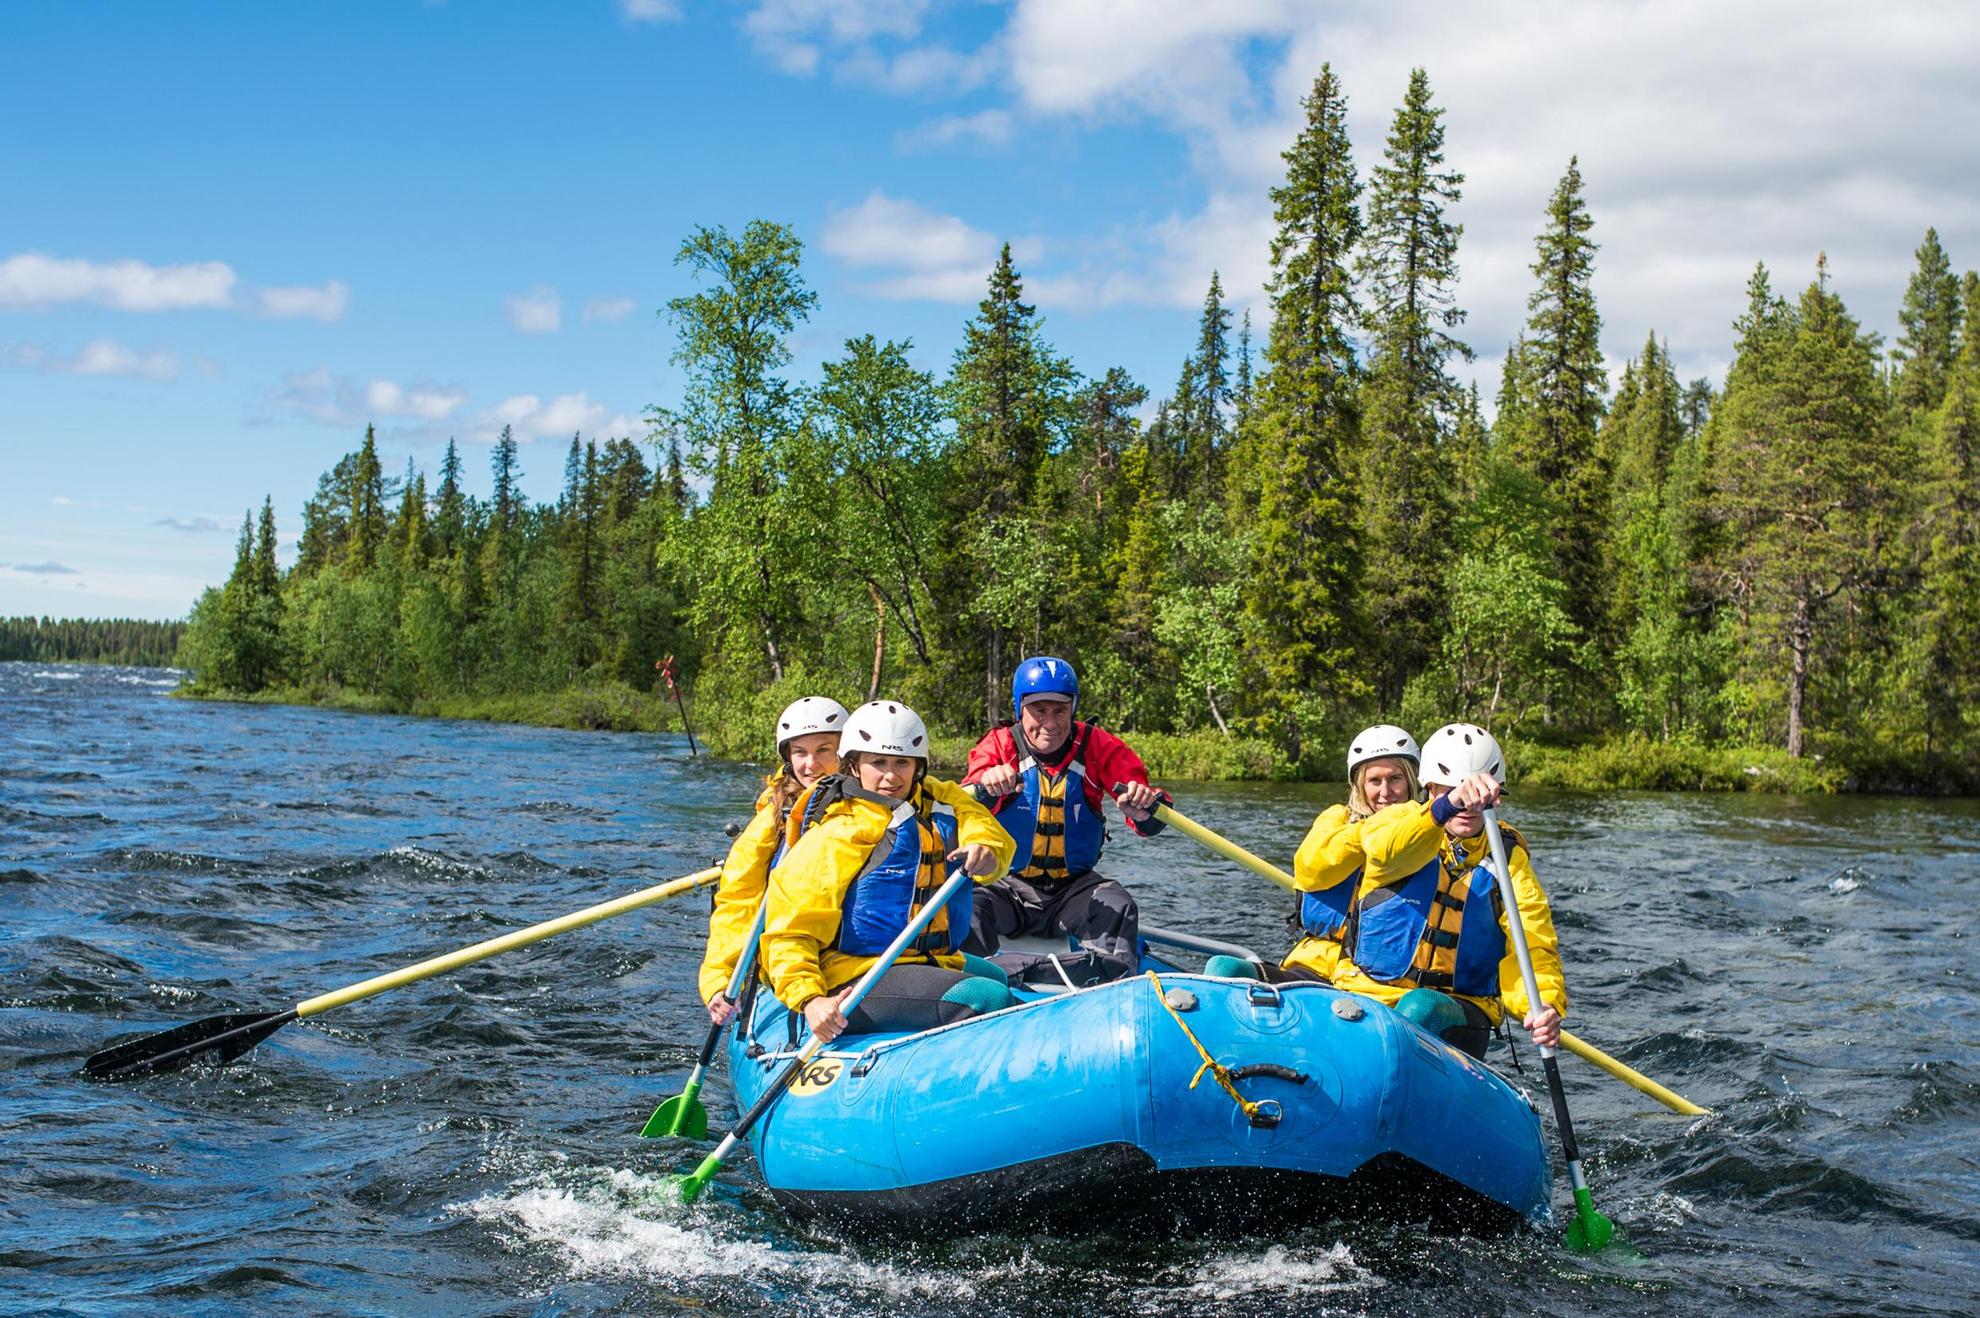 A group of five people are river rafting. In the background you see the forest.